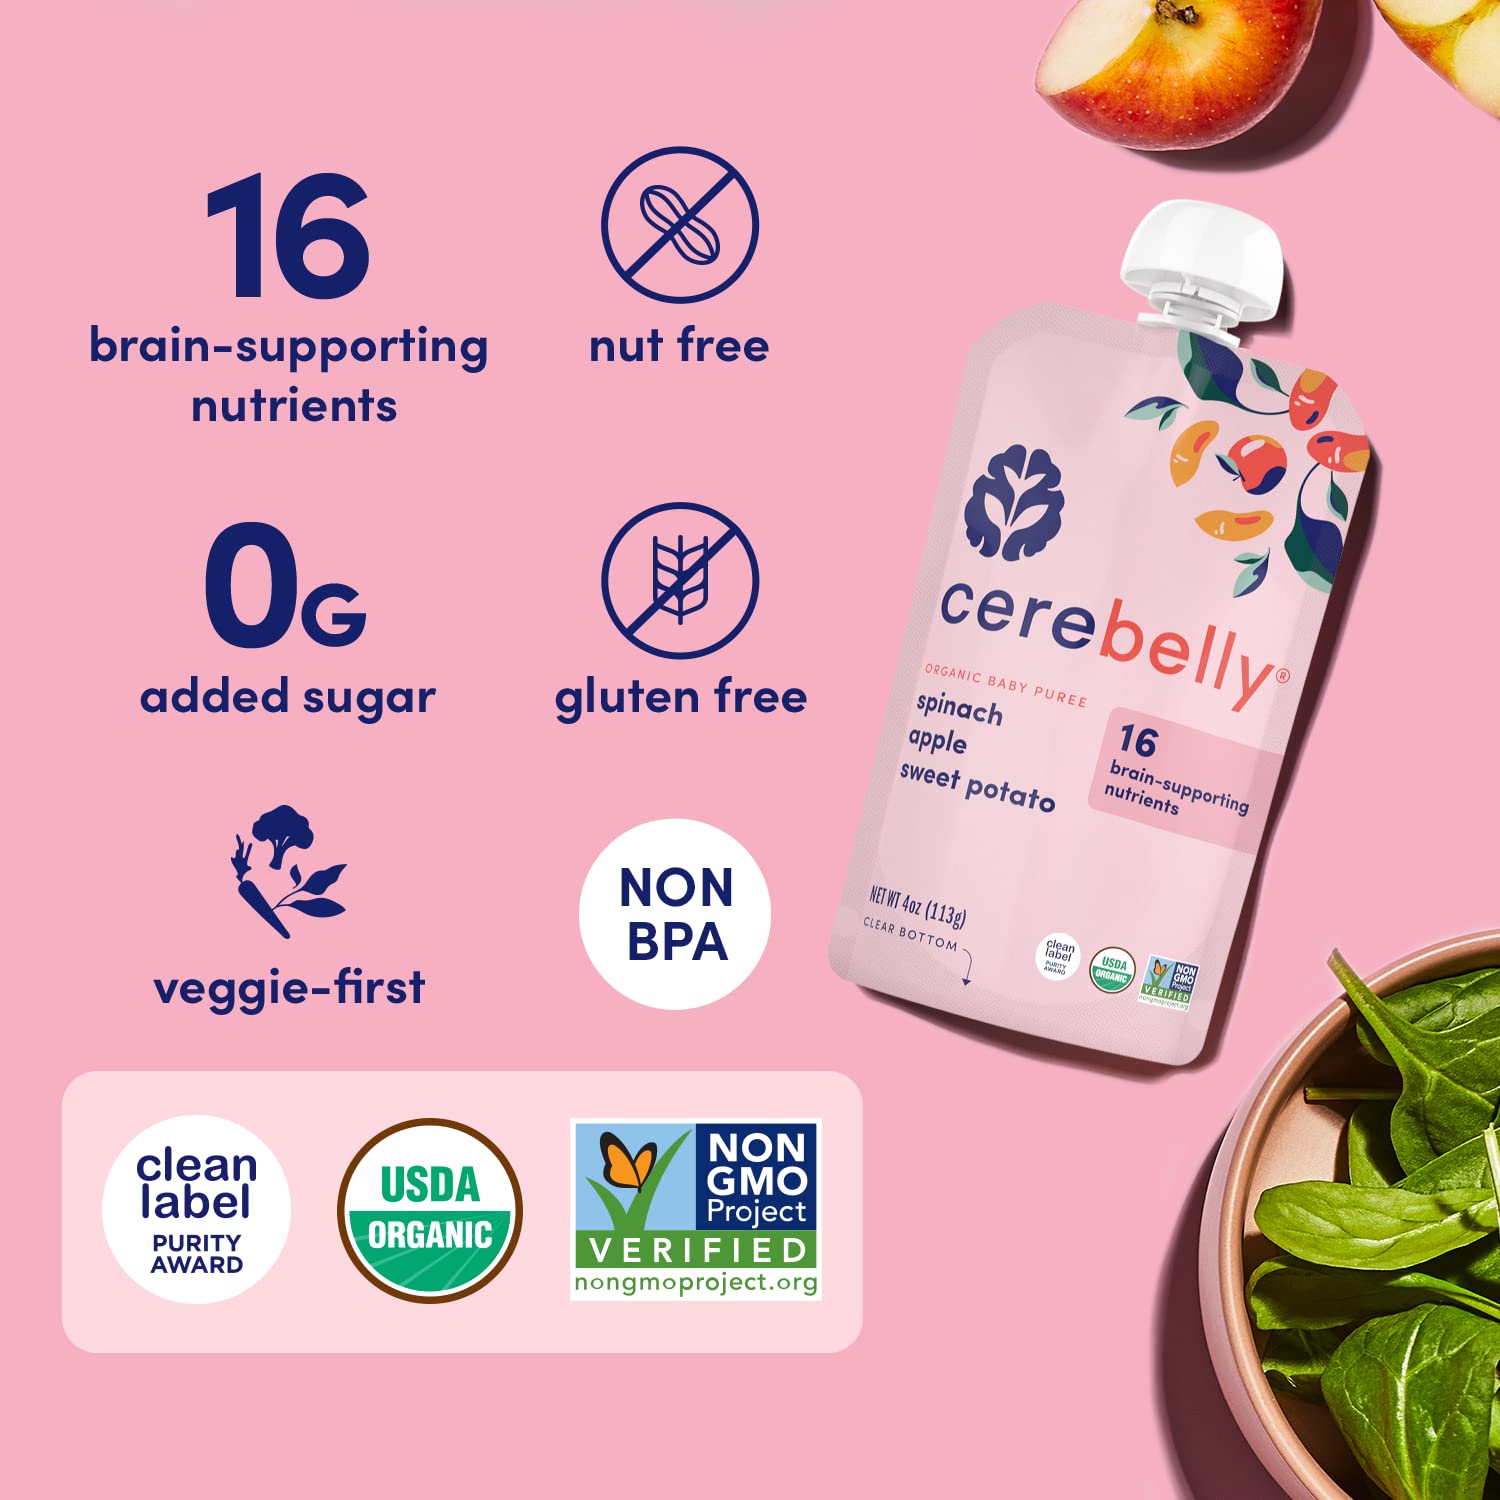 Cerebelly Baby Food Pouches – Organic Spinach Apple Sweet Potato (4 oz, Pack of 12) - Toddler Snacks - 16 Brain-Supporting Nutrients - Healthy Snacks, Made with Gluten-Free Ingredients, No Added Sugar : Baby